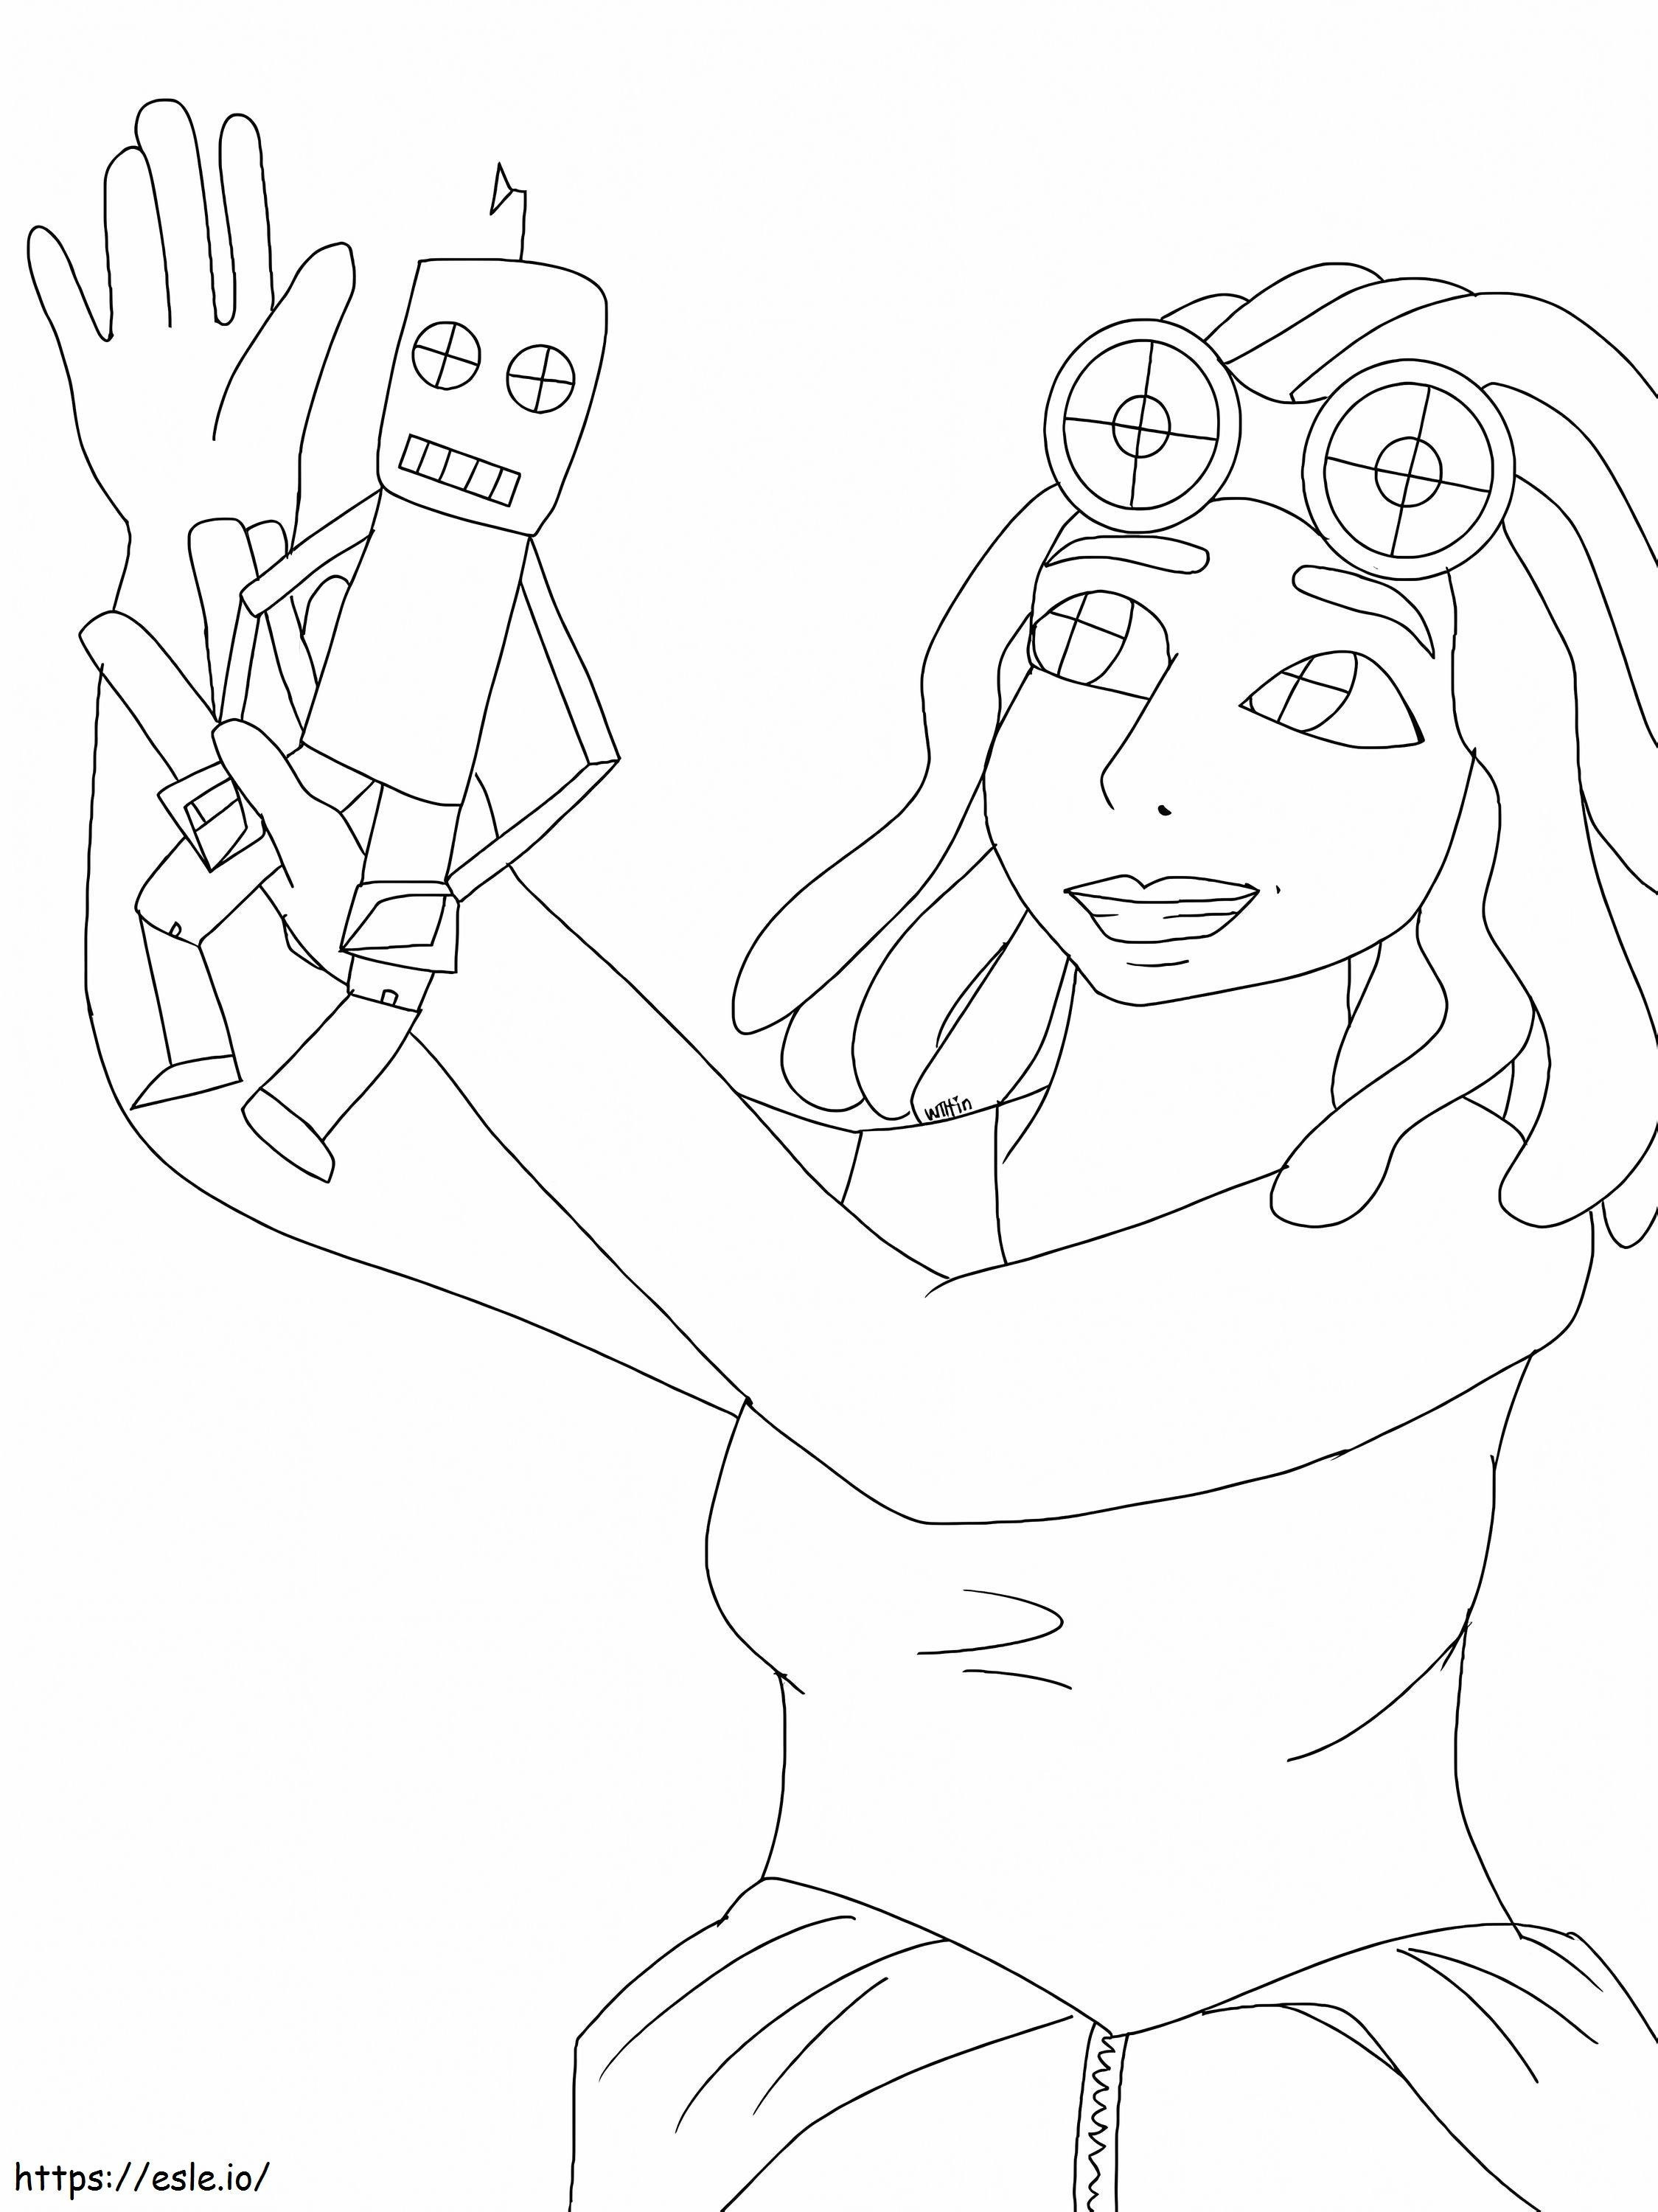 Printable Mei Hatsume coloring page